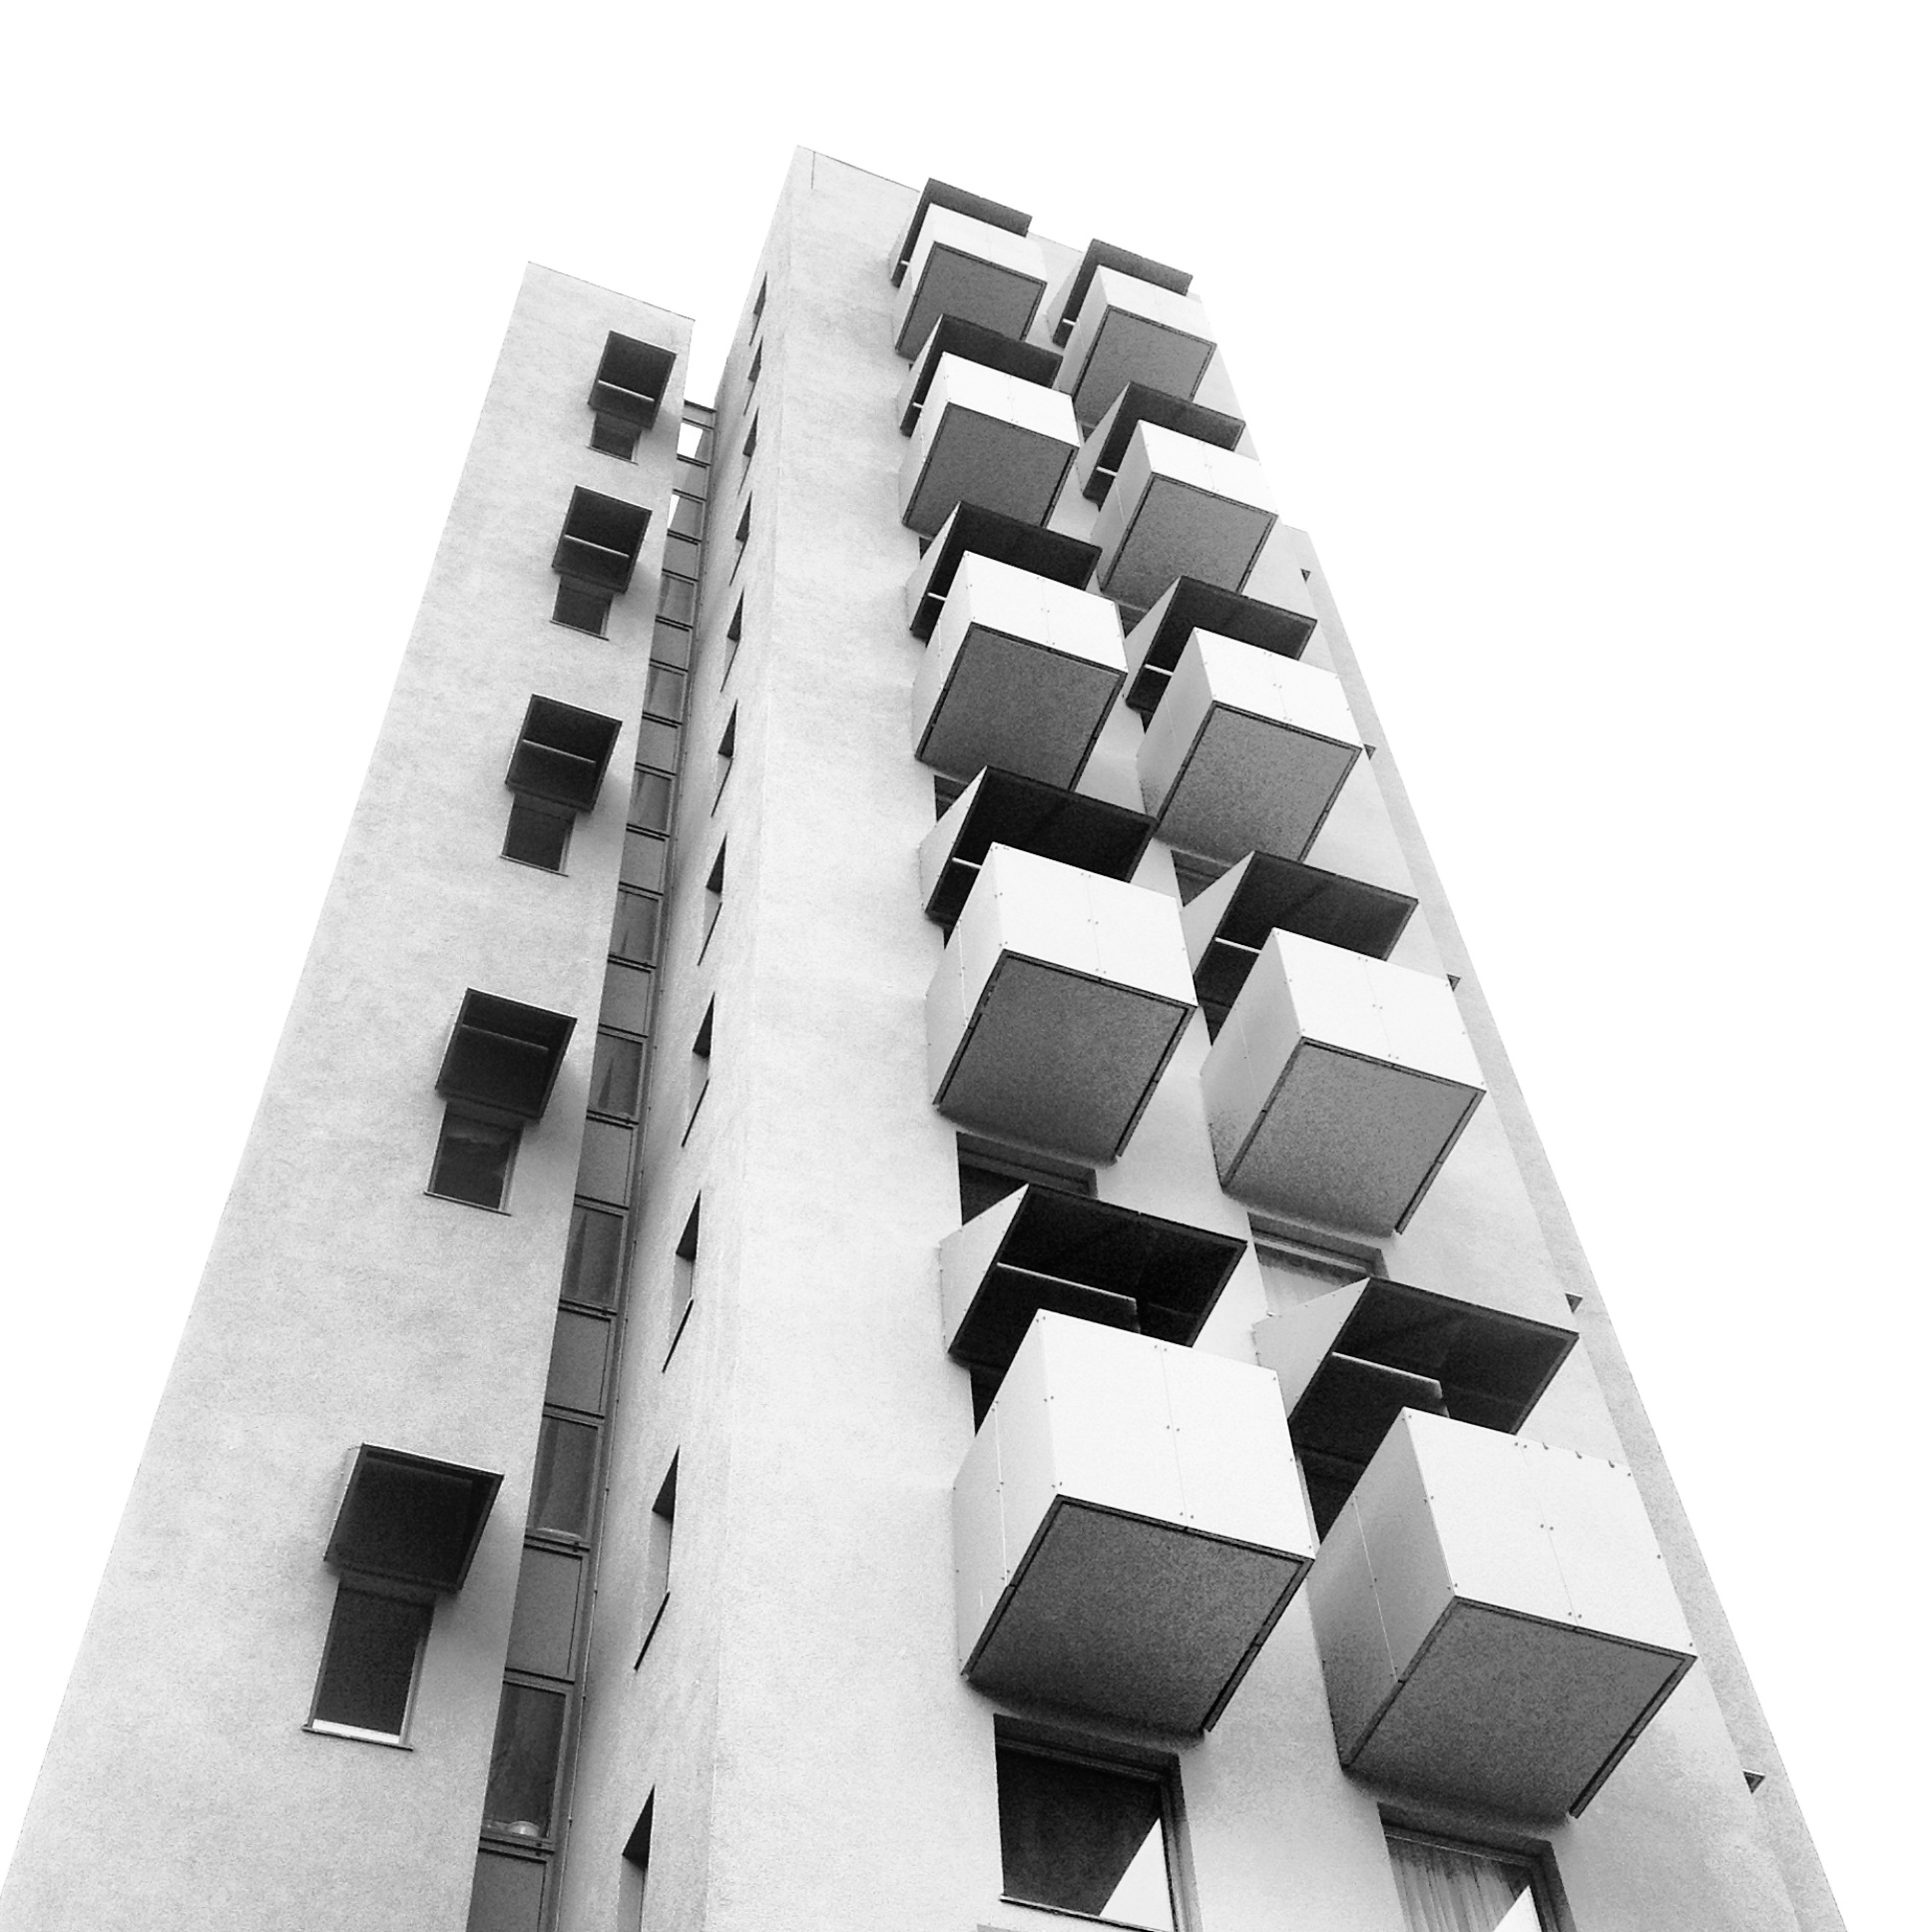 A black and white abstract architectural image of a highrise